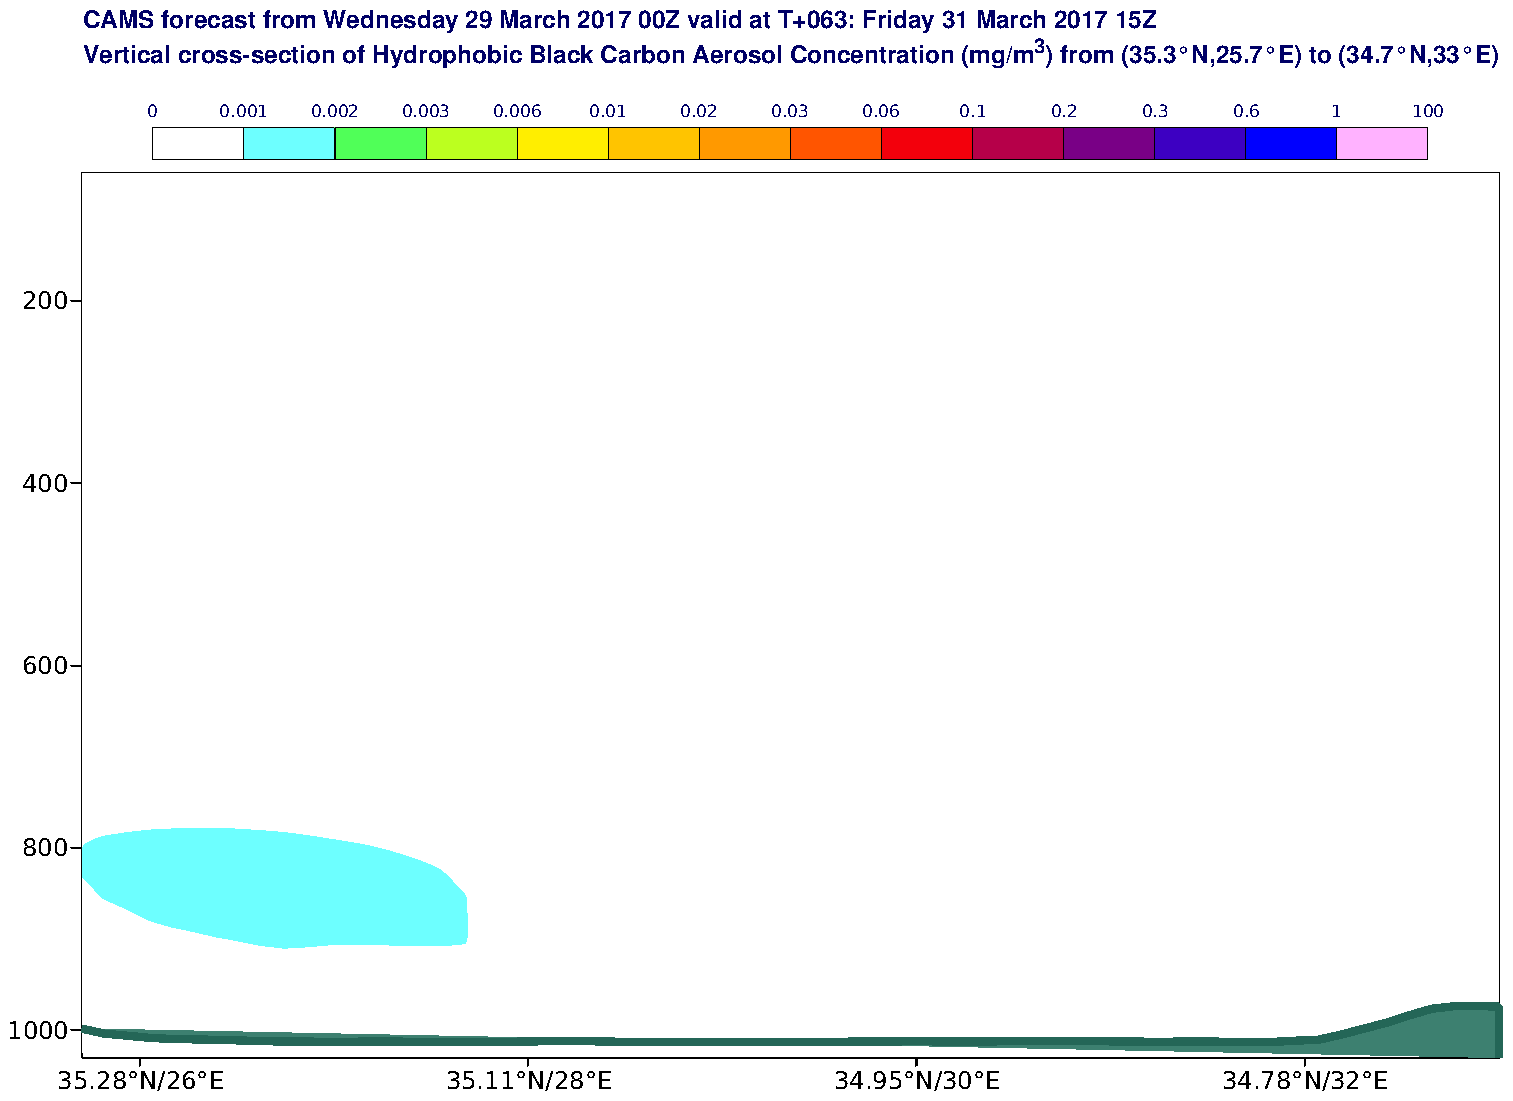 Vertical cross-section of Hydrophobic Black Carbon Aerosol Concentration (mg/m3) valid at T63 - 2017-03-31 15:00